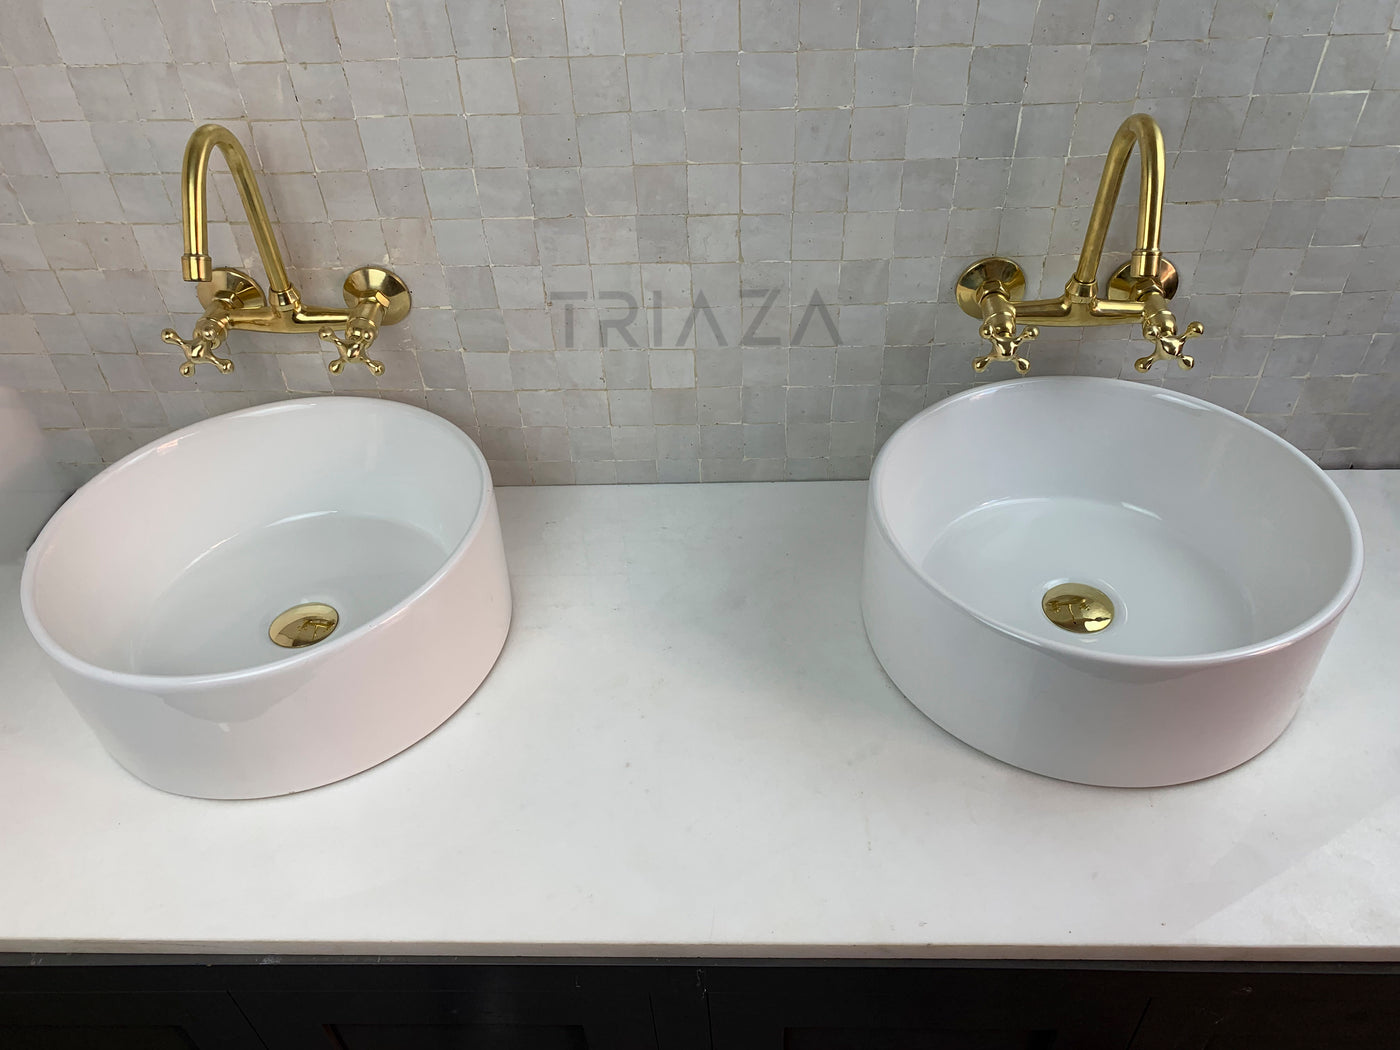 WALL MOUNTED UNLACQUERED BRASS FAUCET - Triazadesigns